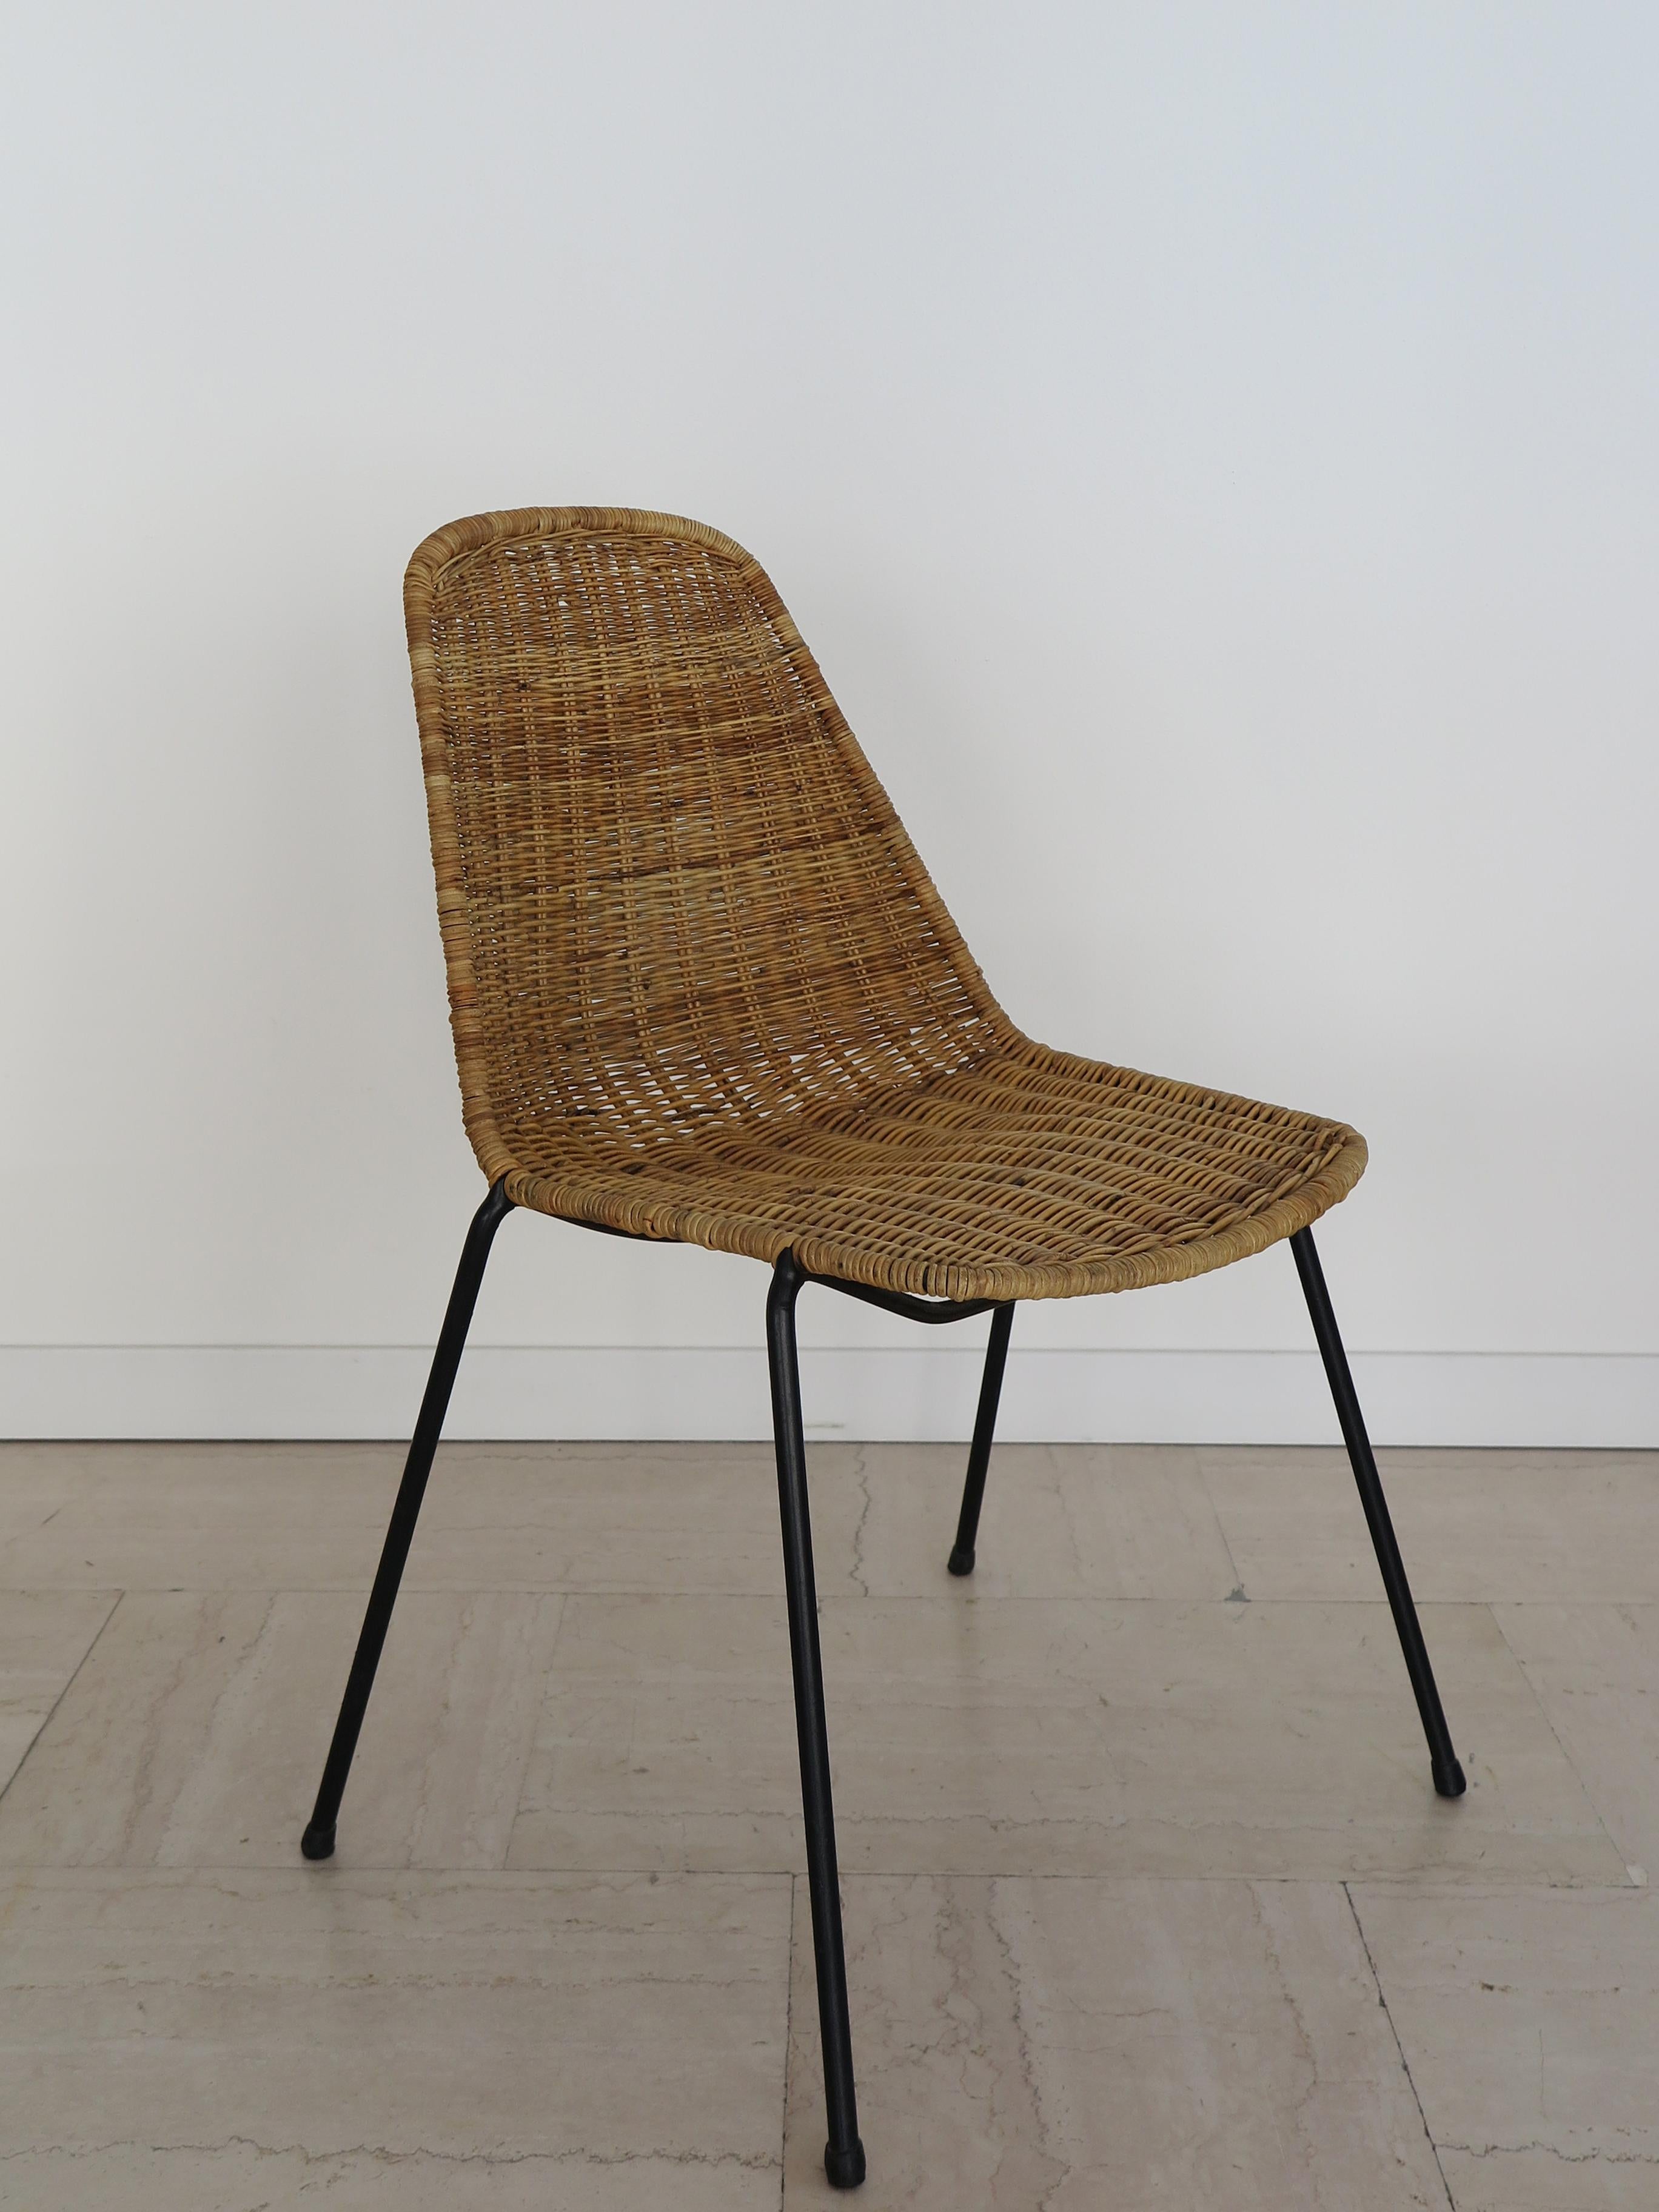 Metal Italian Midcentury Rattan Dining Chairs Design Campo & Graffi for Home, 1950s For Sale